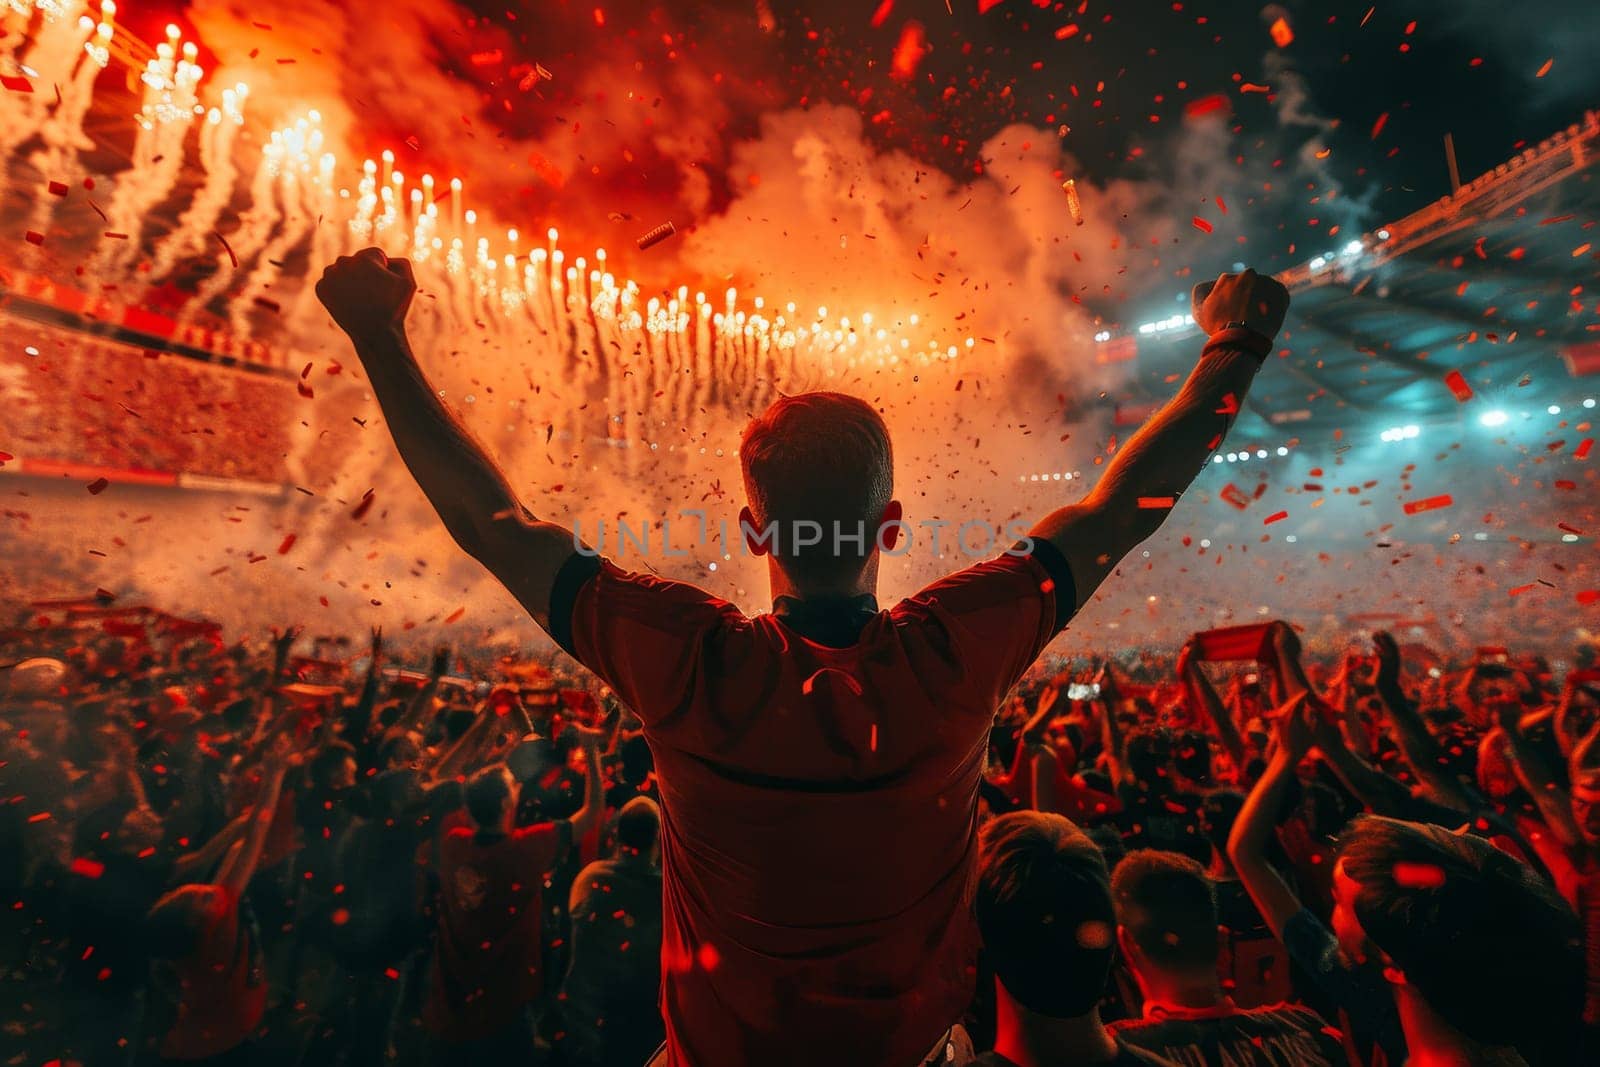 A man is standing in a crowd of people, holding his arms up in the air. The crowd is cheering and there are fireworks in the background. Scene is celebratory and energetic